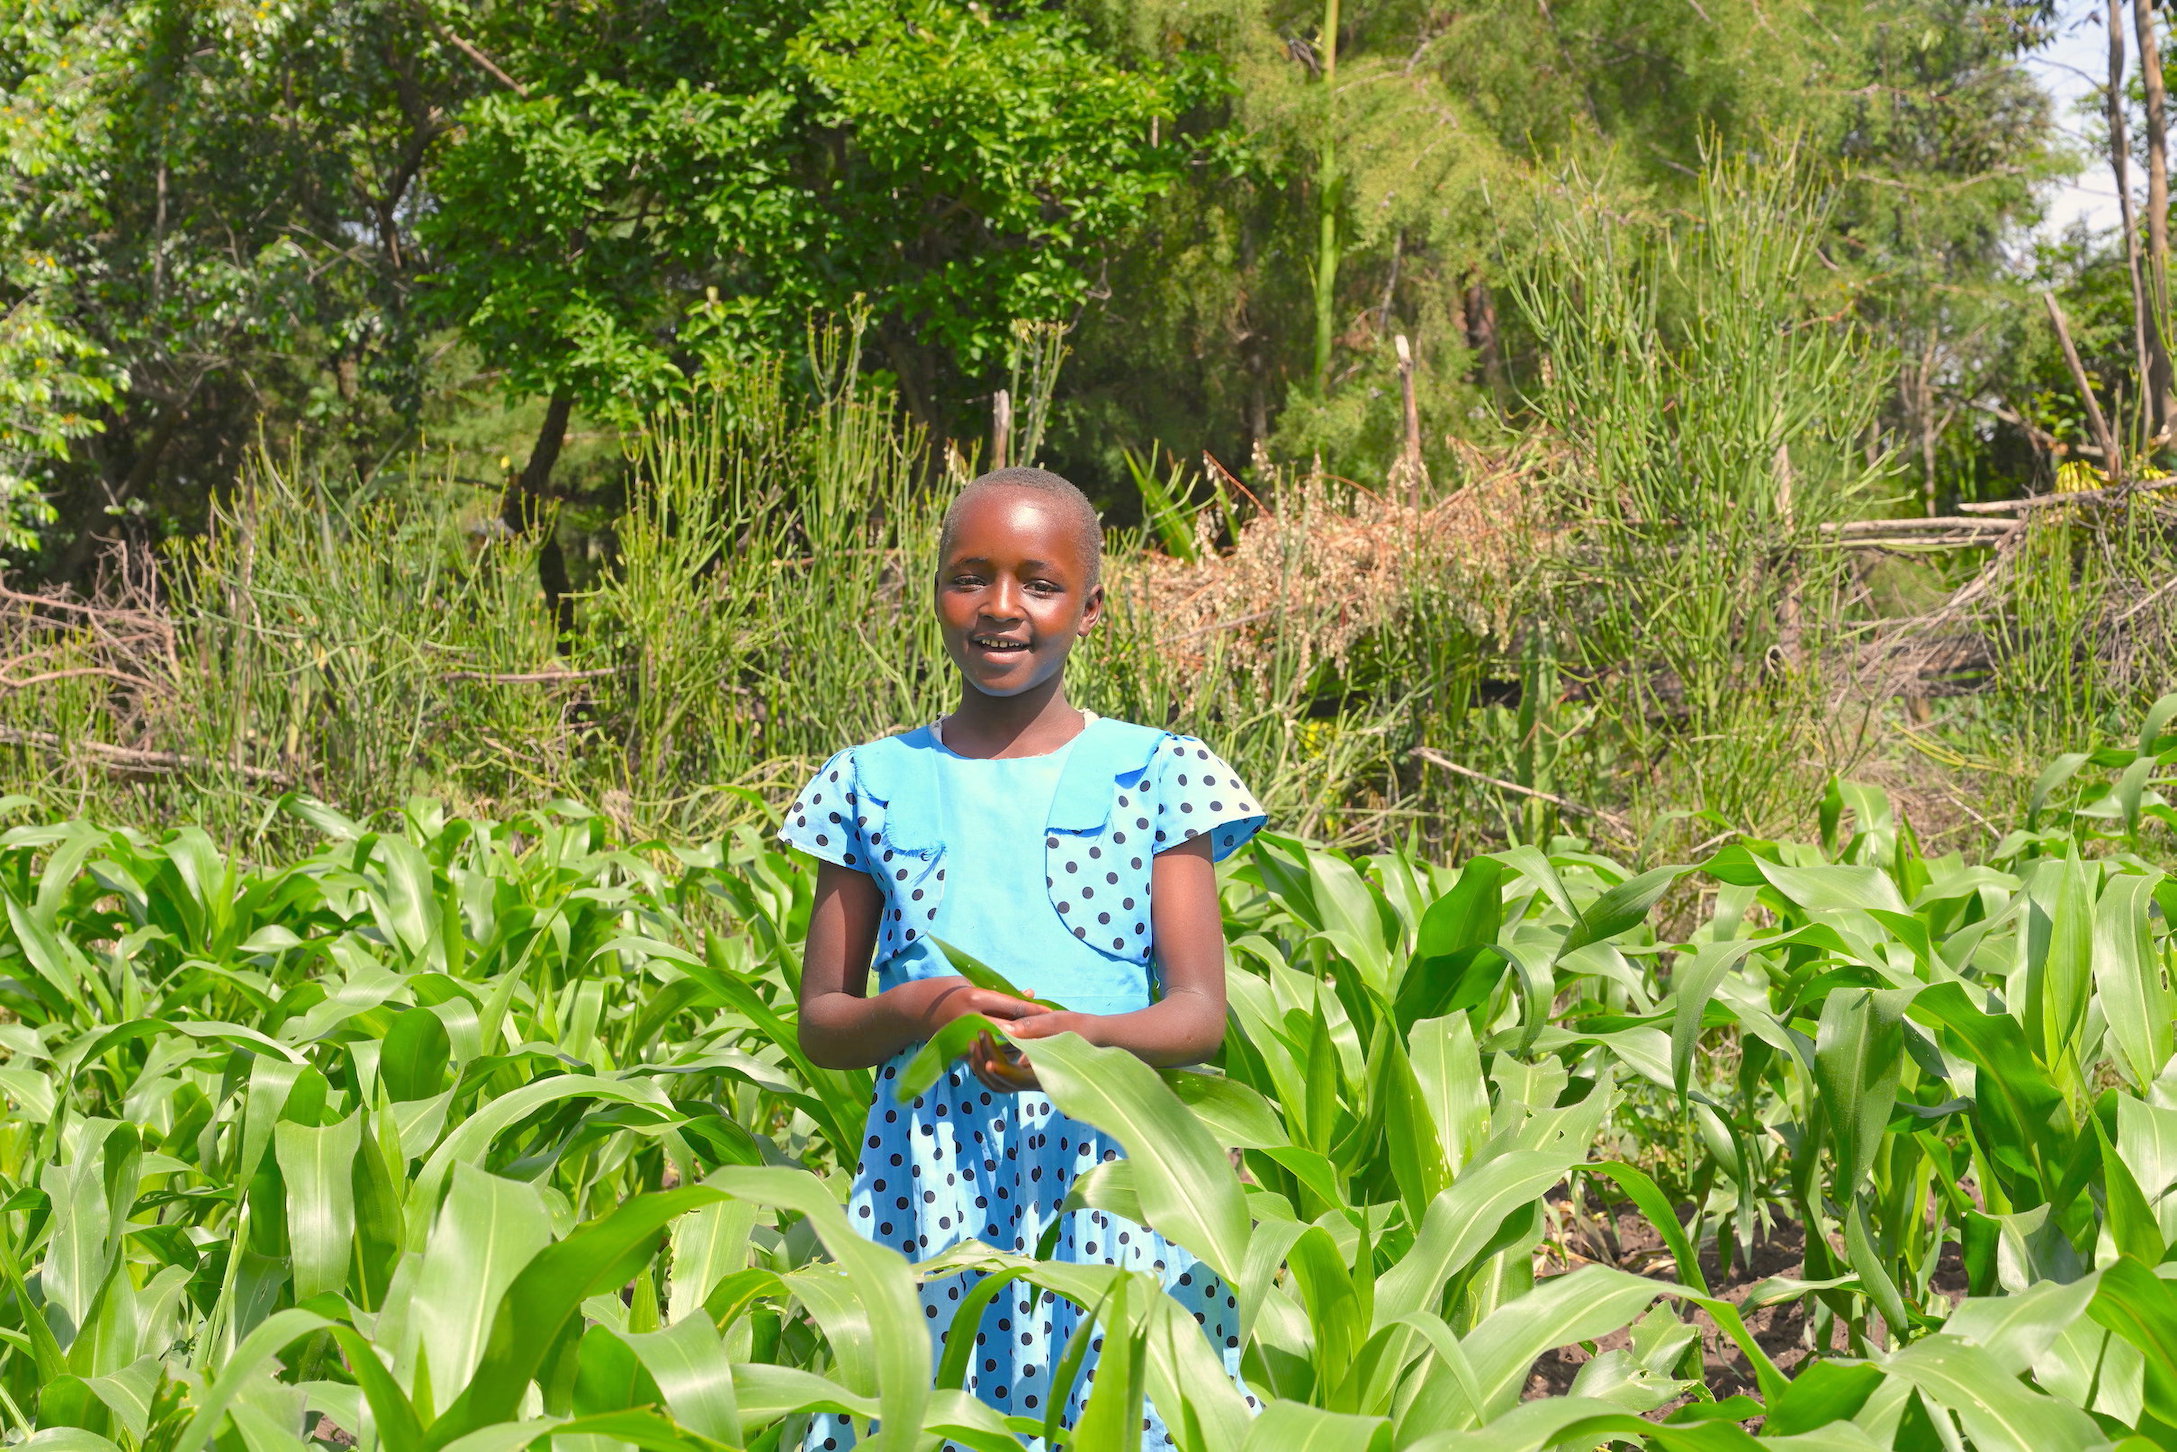 With crop diversity, Anita and her family enjoy balanced diets that keep them healthy all year round.